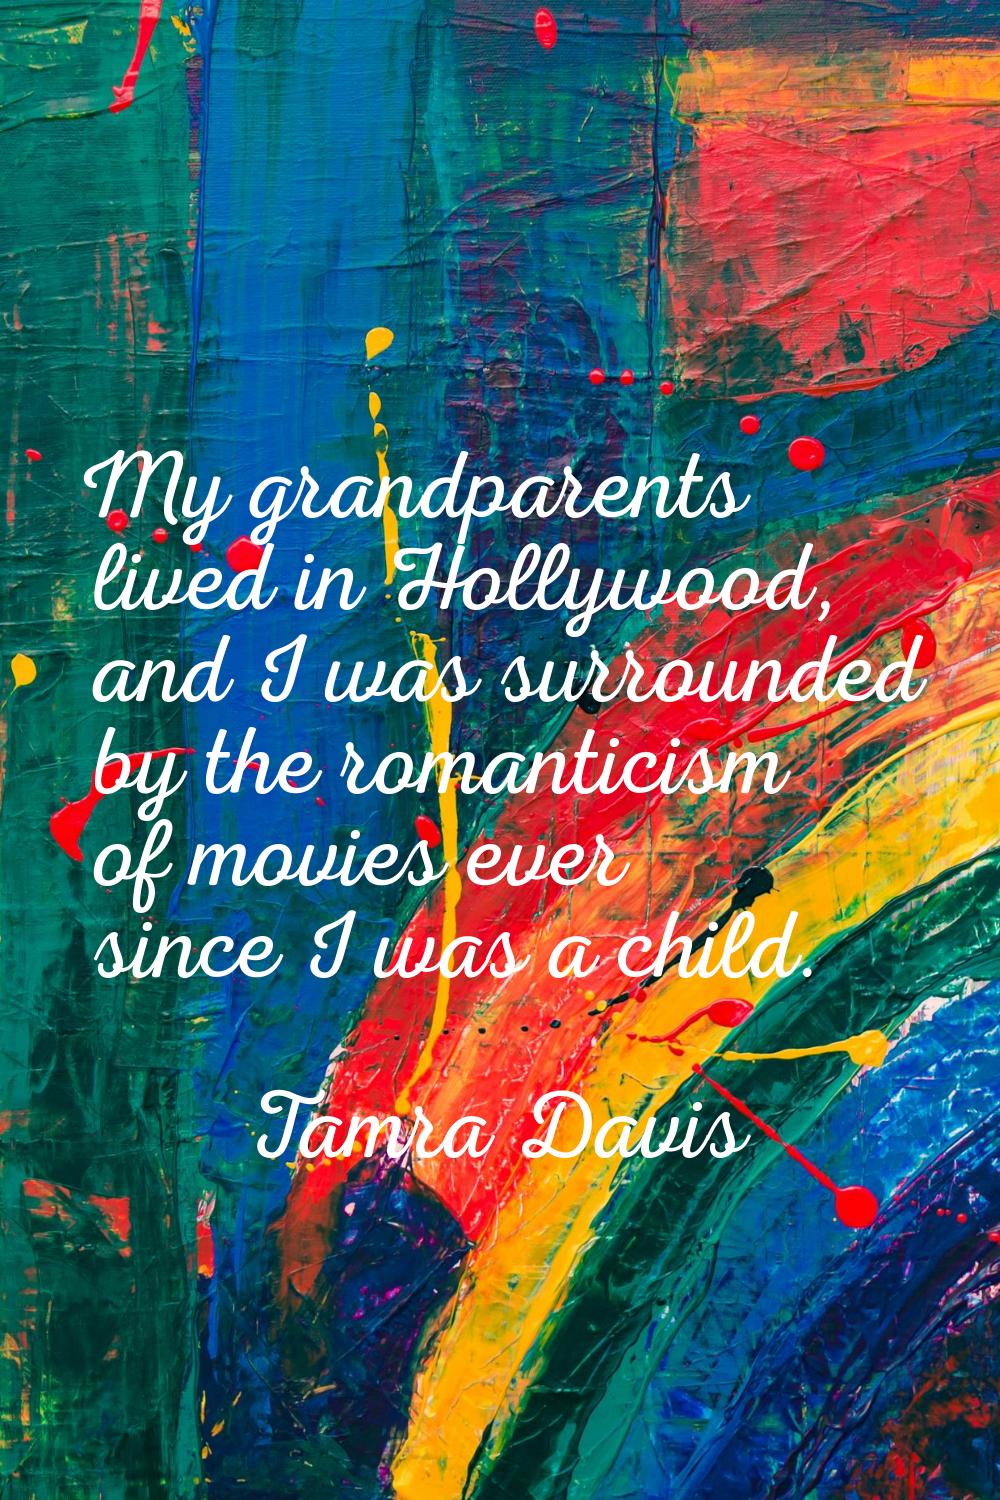 My grandparents lived in Hollywood, and I was surrounded by the romanticism of movies ever since I 